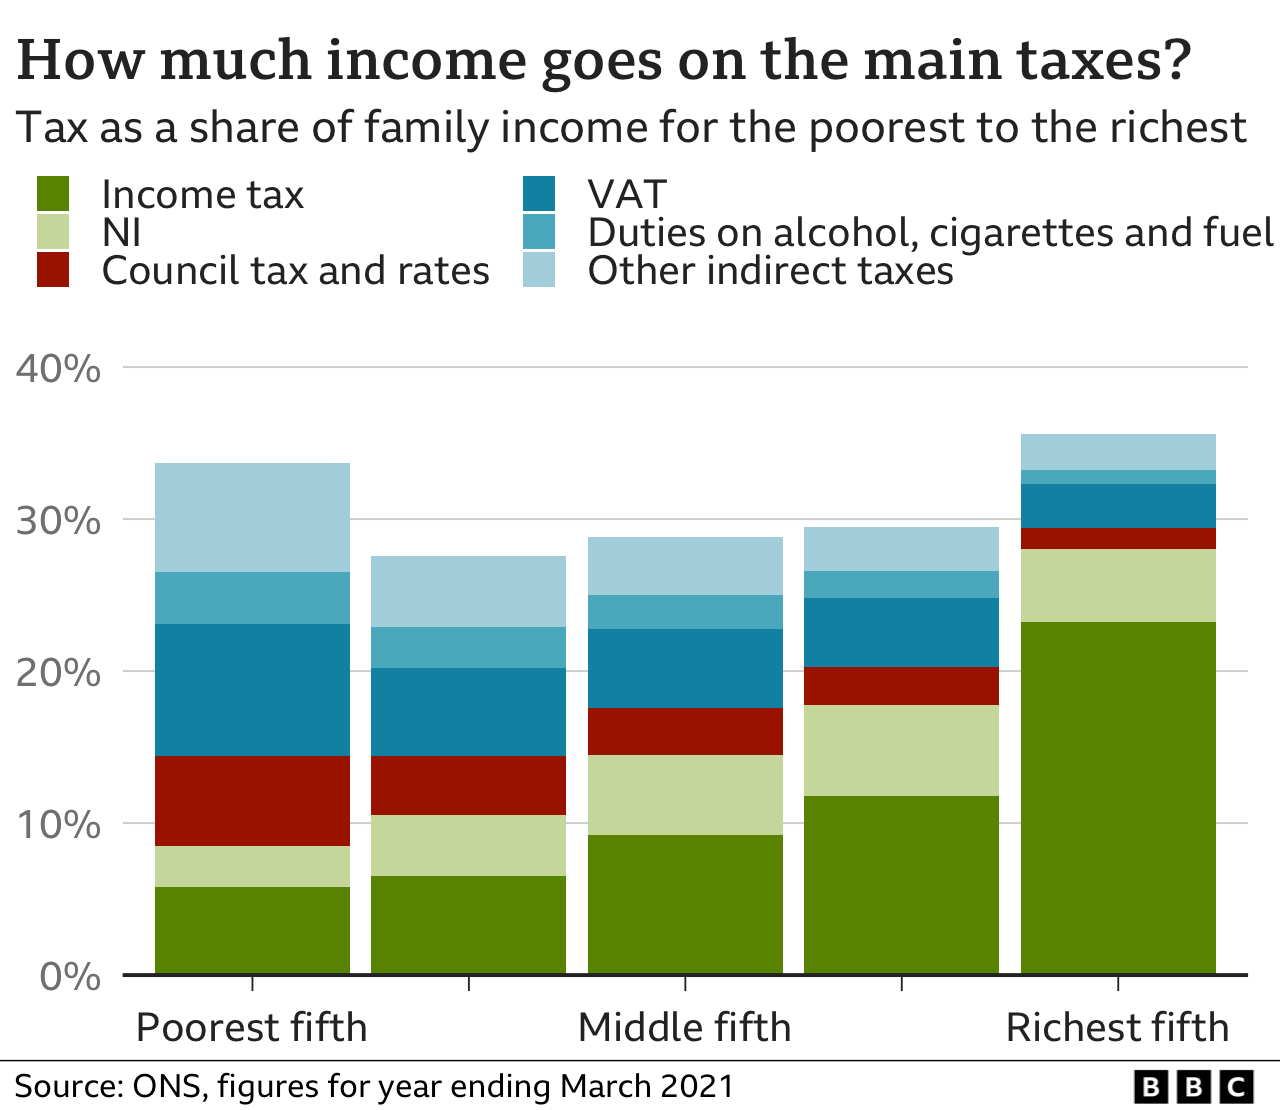 Bar chart showing how much of families' incomes goes on income tax, NI, council tax, VAT and duties. The chart shows this split for the poorest fifth of households up to the richest fifth.